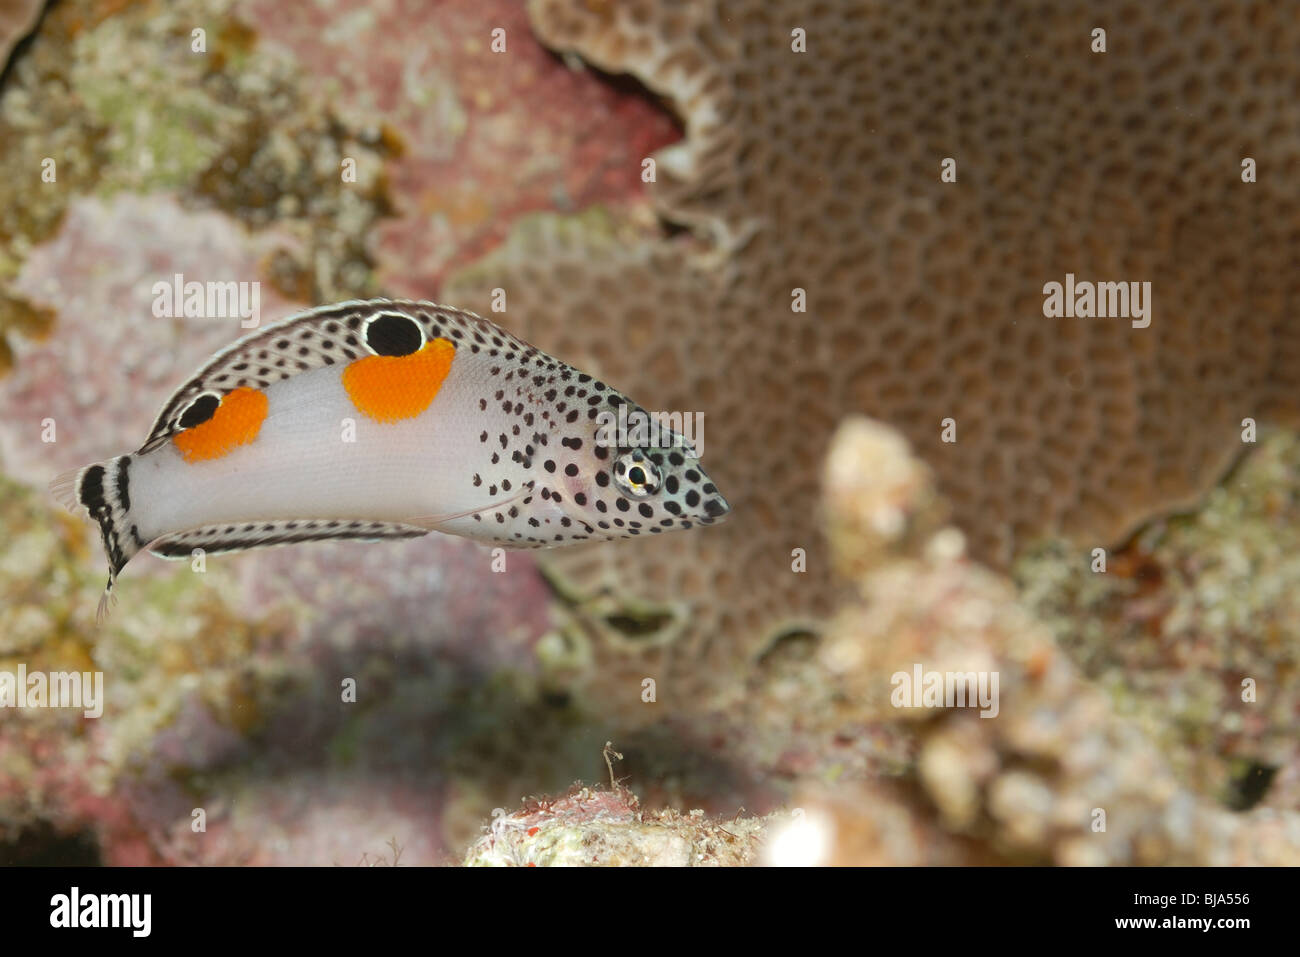 Clown coris juvenile phase in the Red Sea. Stock Photo